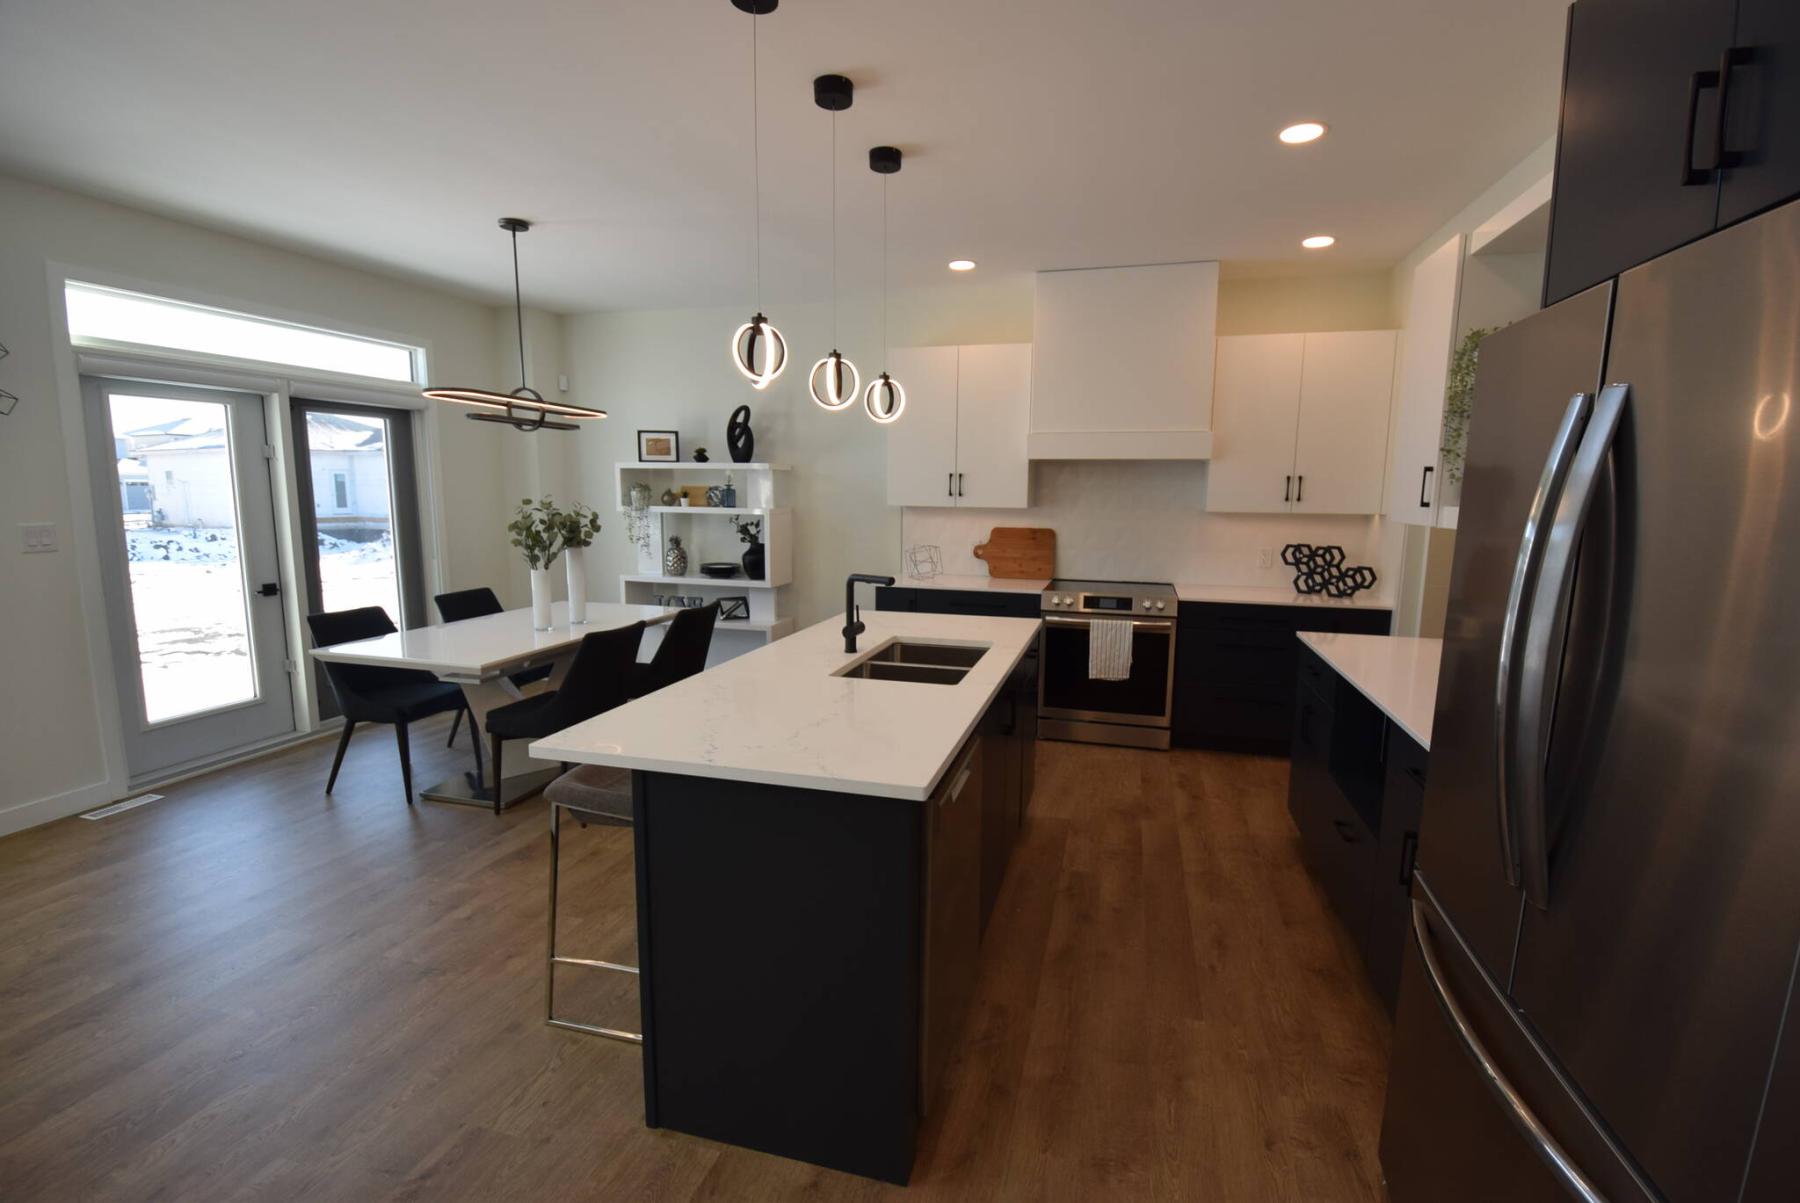  <p>Todd Lewys / Free Press</p>
                                <p>Although the Spring Parade of Homes has come to an end, you can still view the MHBA show homes throughout the year.</p> 